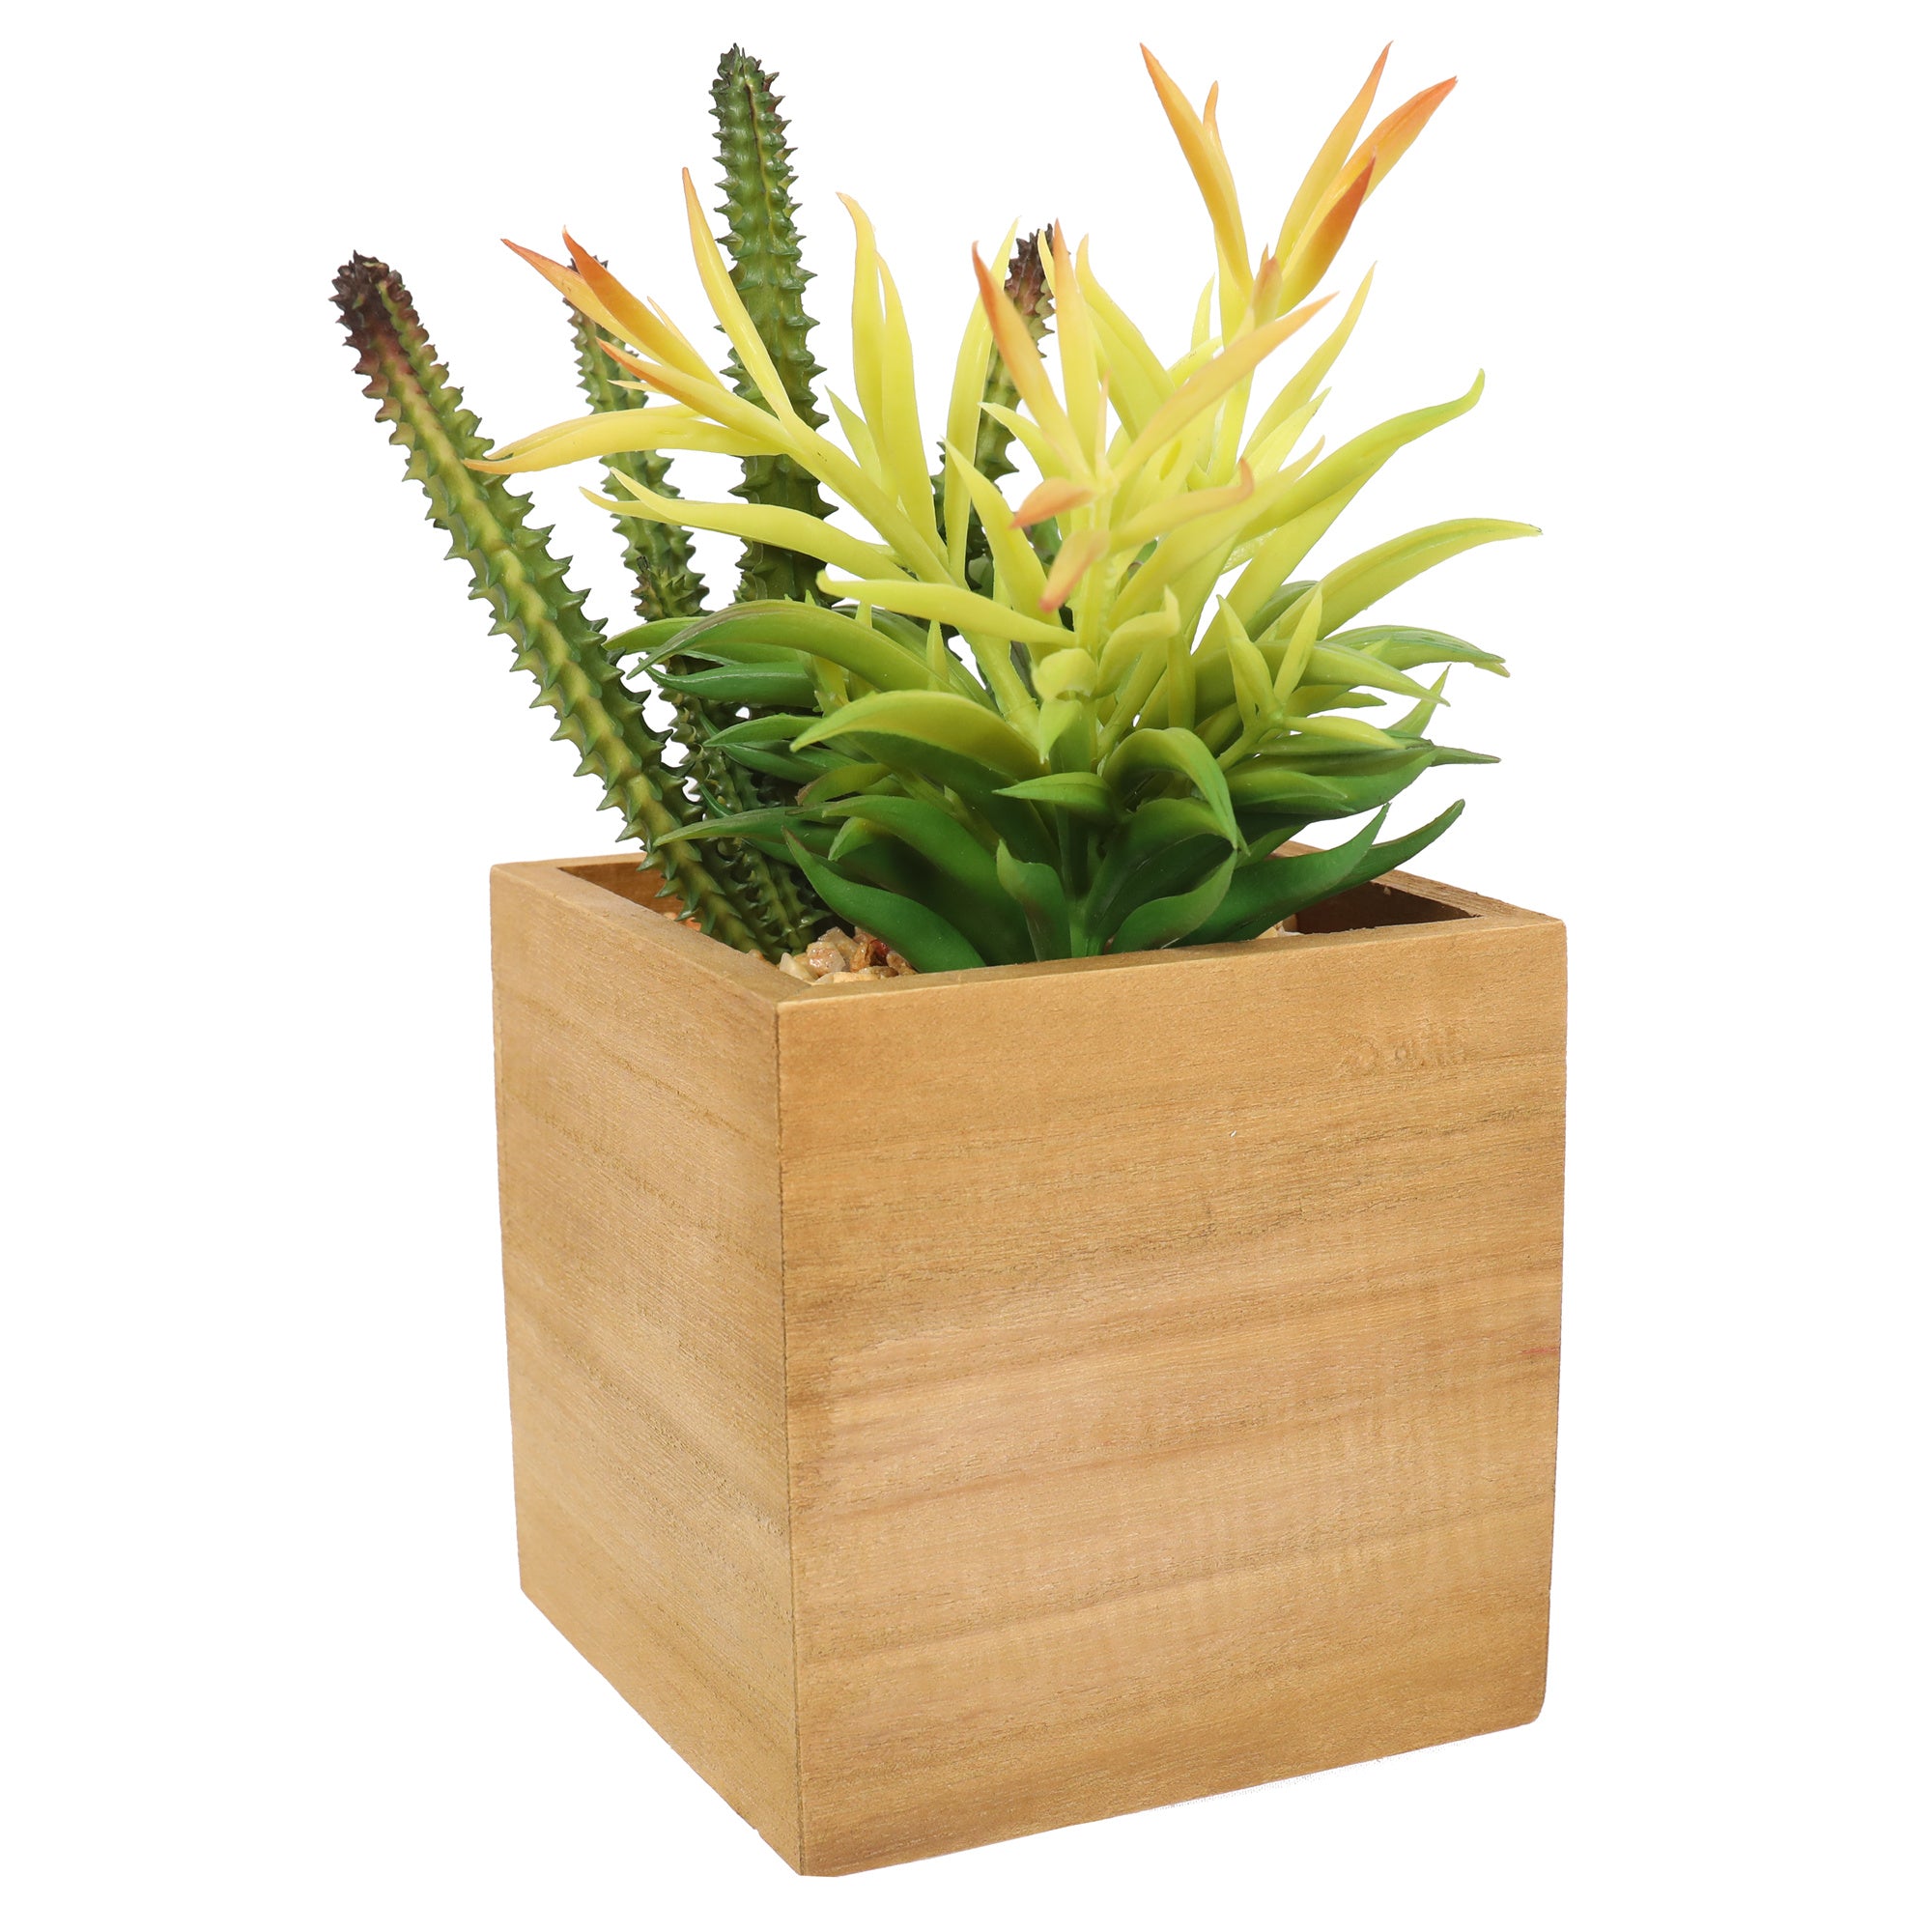 Simple Succulent plant in a wooden box